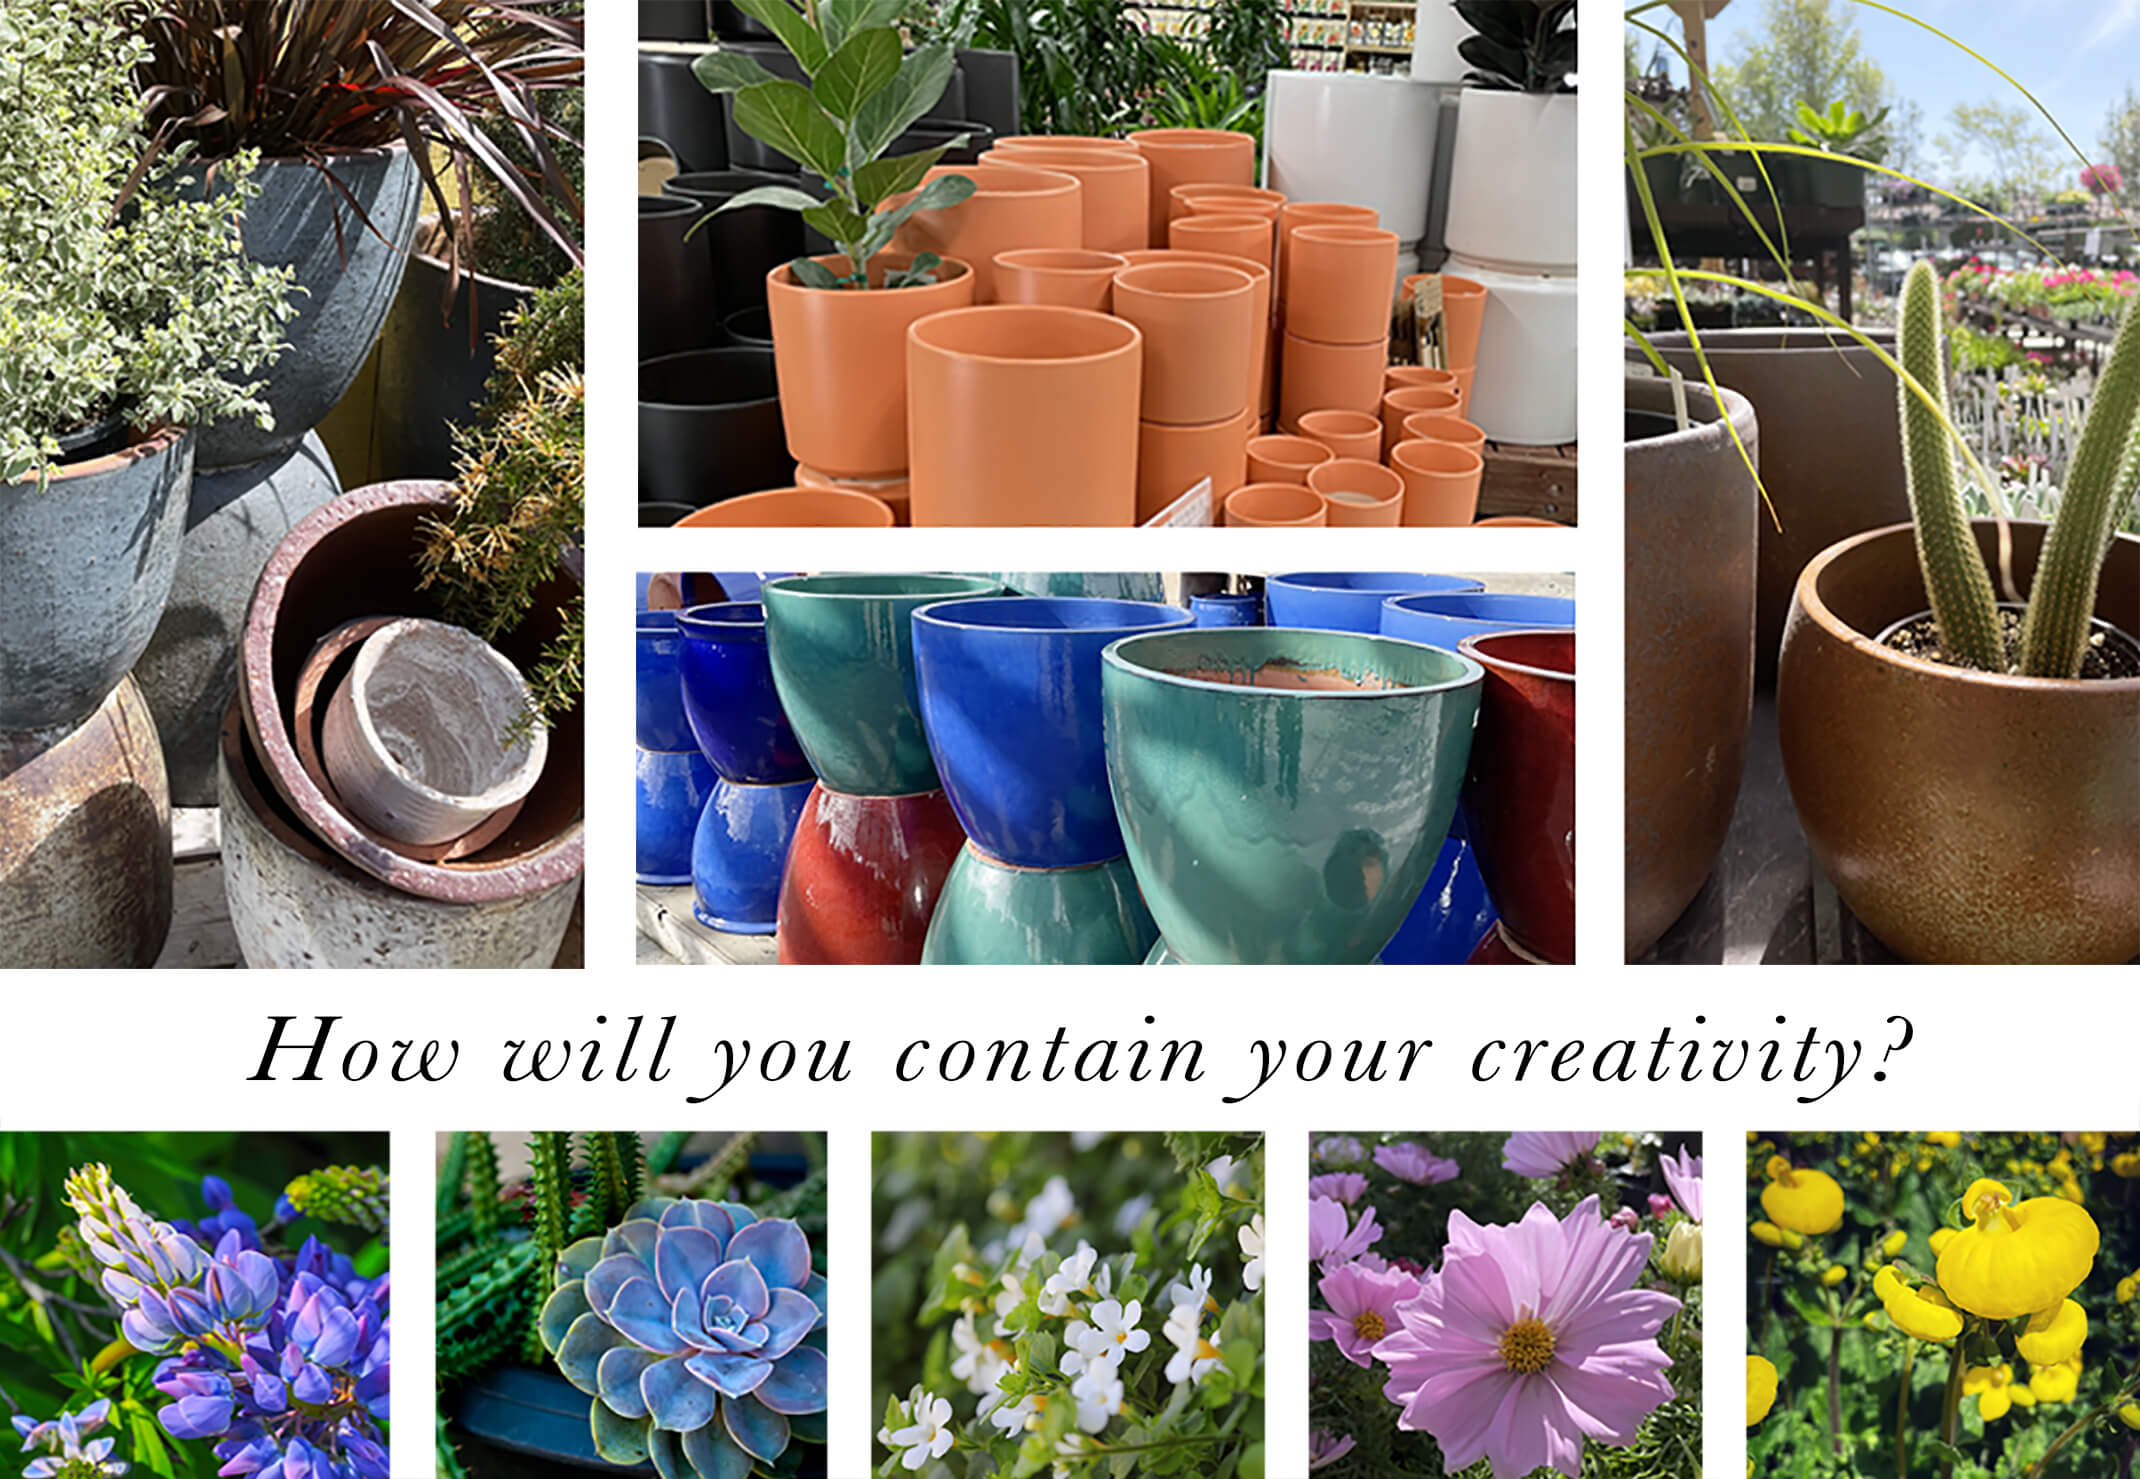 Assorted pottery and perennials and succulents container gardening with the words how will you contain your creativity?